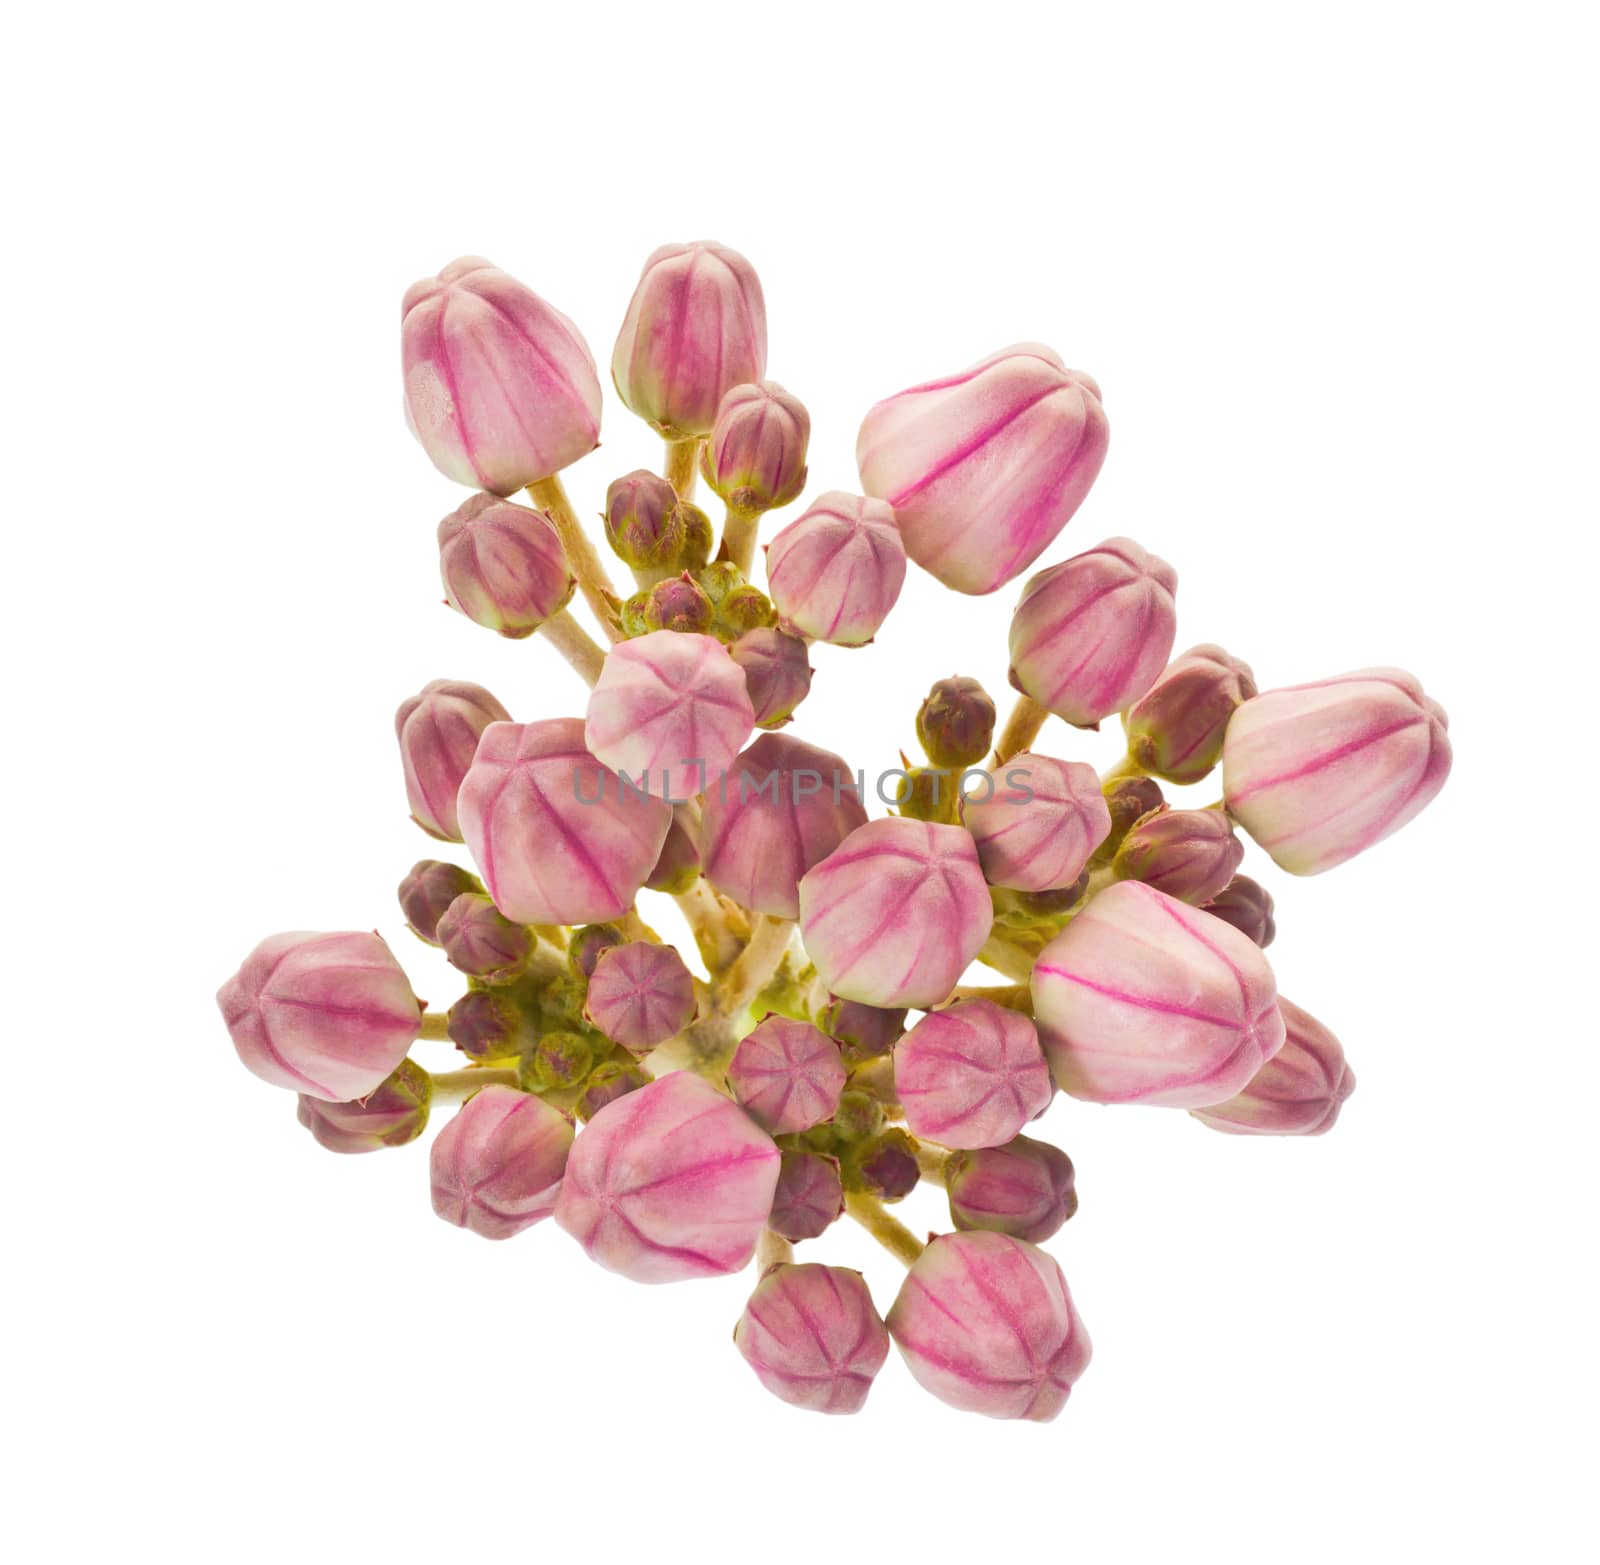 Calotropis Gigantea of Crown flower isolate on white background and clipping path